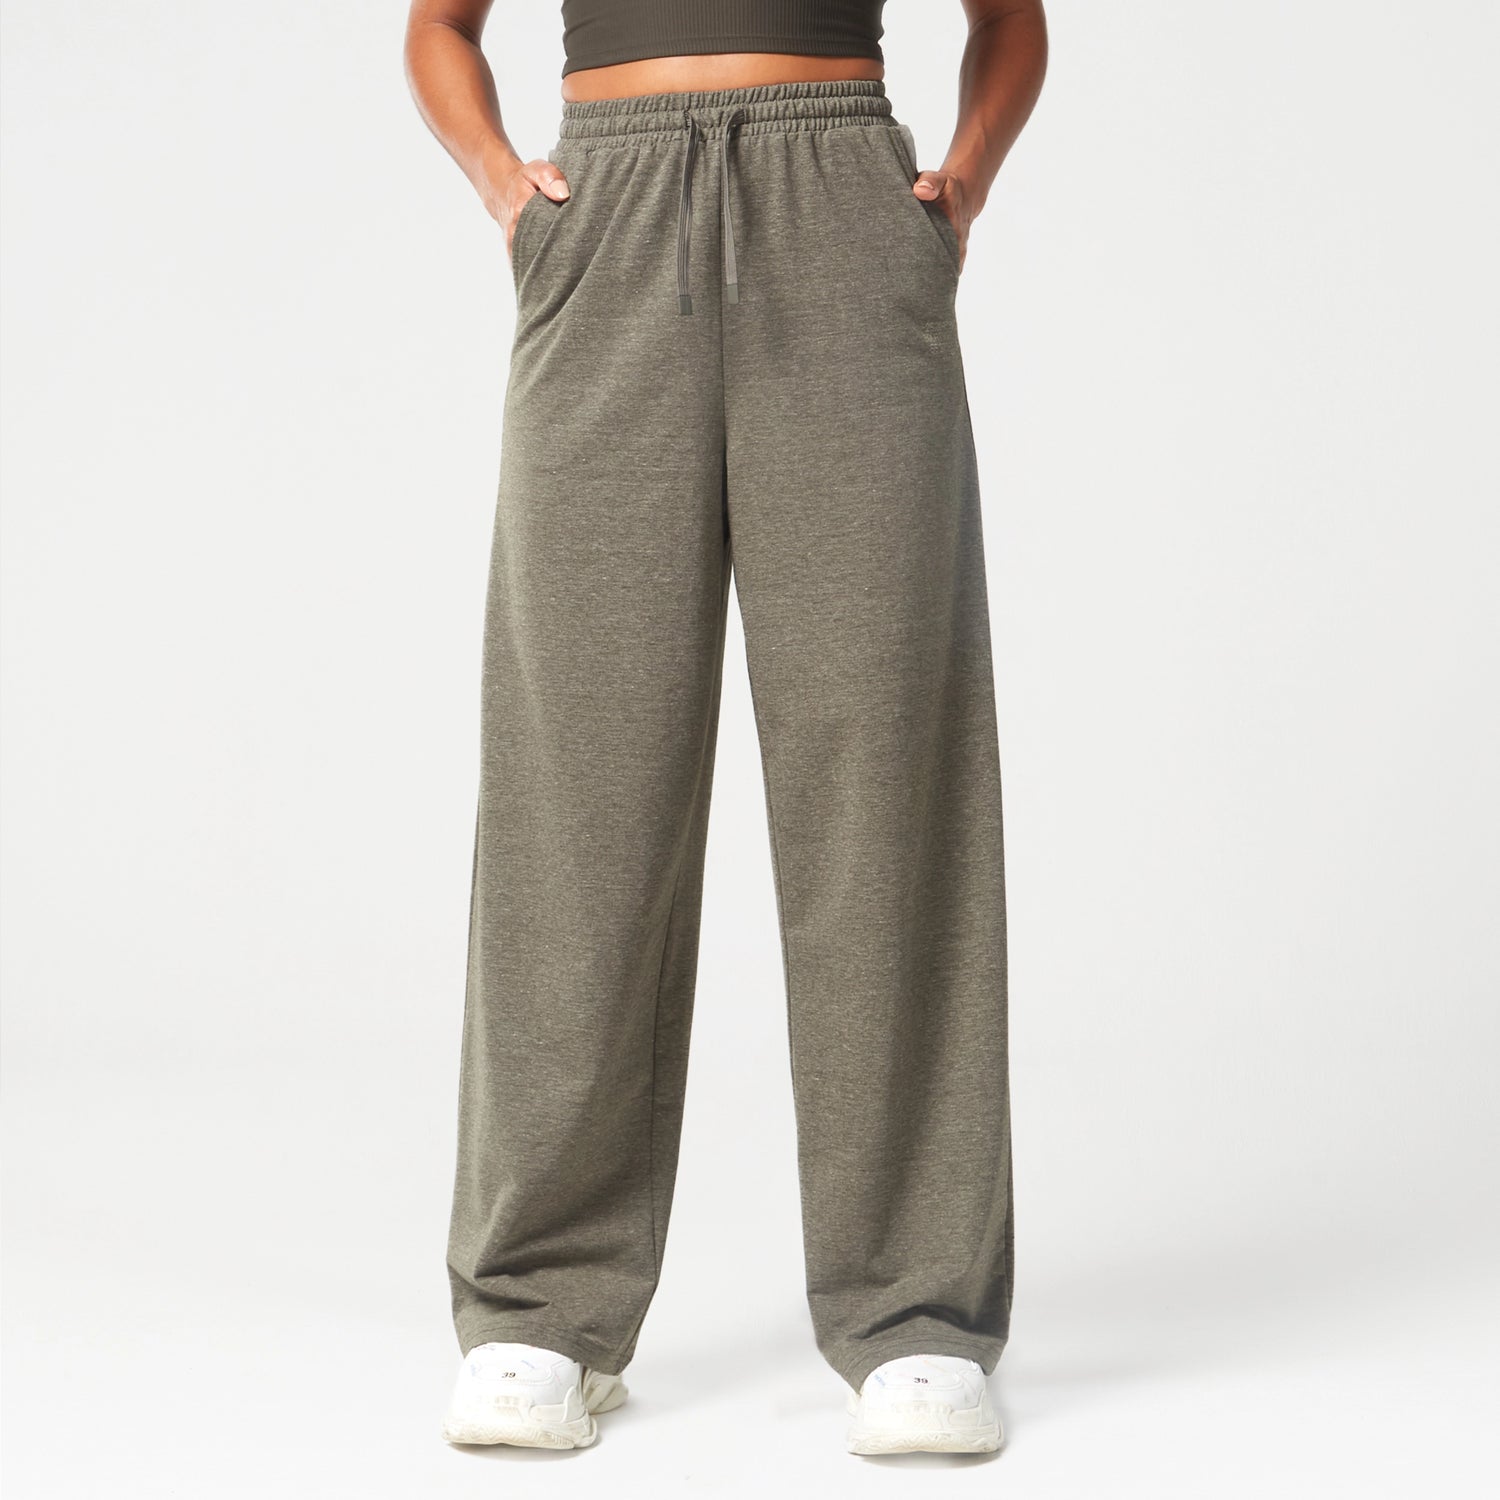 AE | Code Live in Joggers - Khaki Marl | Workout Pants Women | SQUATWOLF